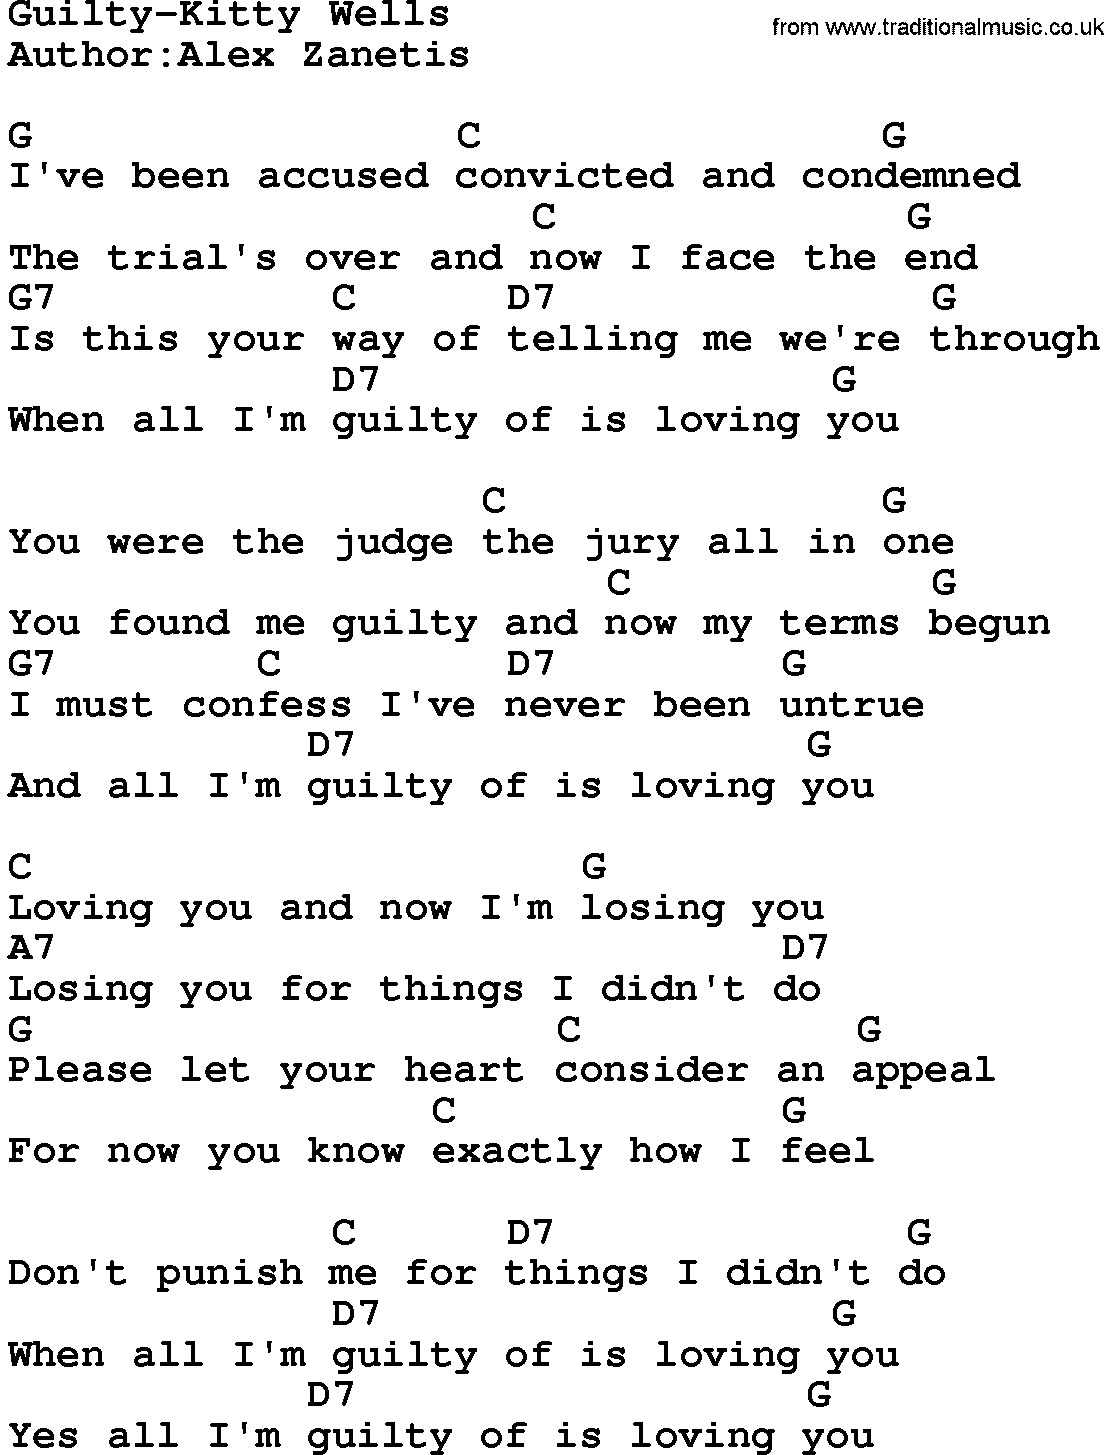 Country music song: Guilty-Kitty Wells lyrics and chords